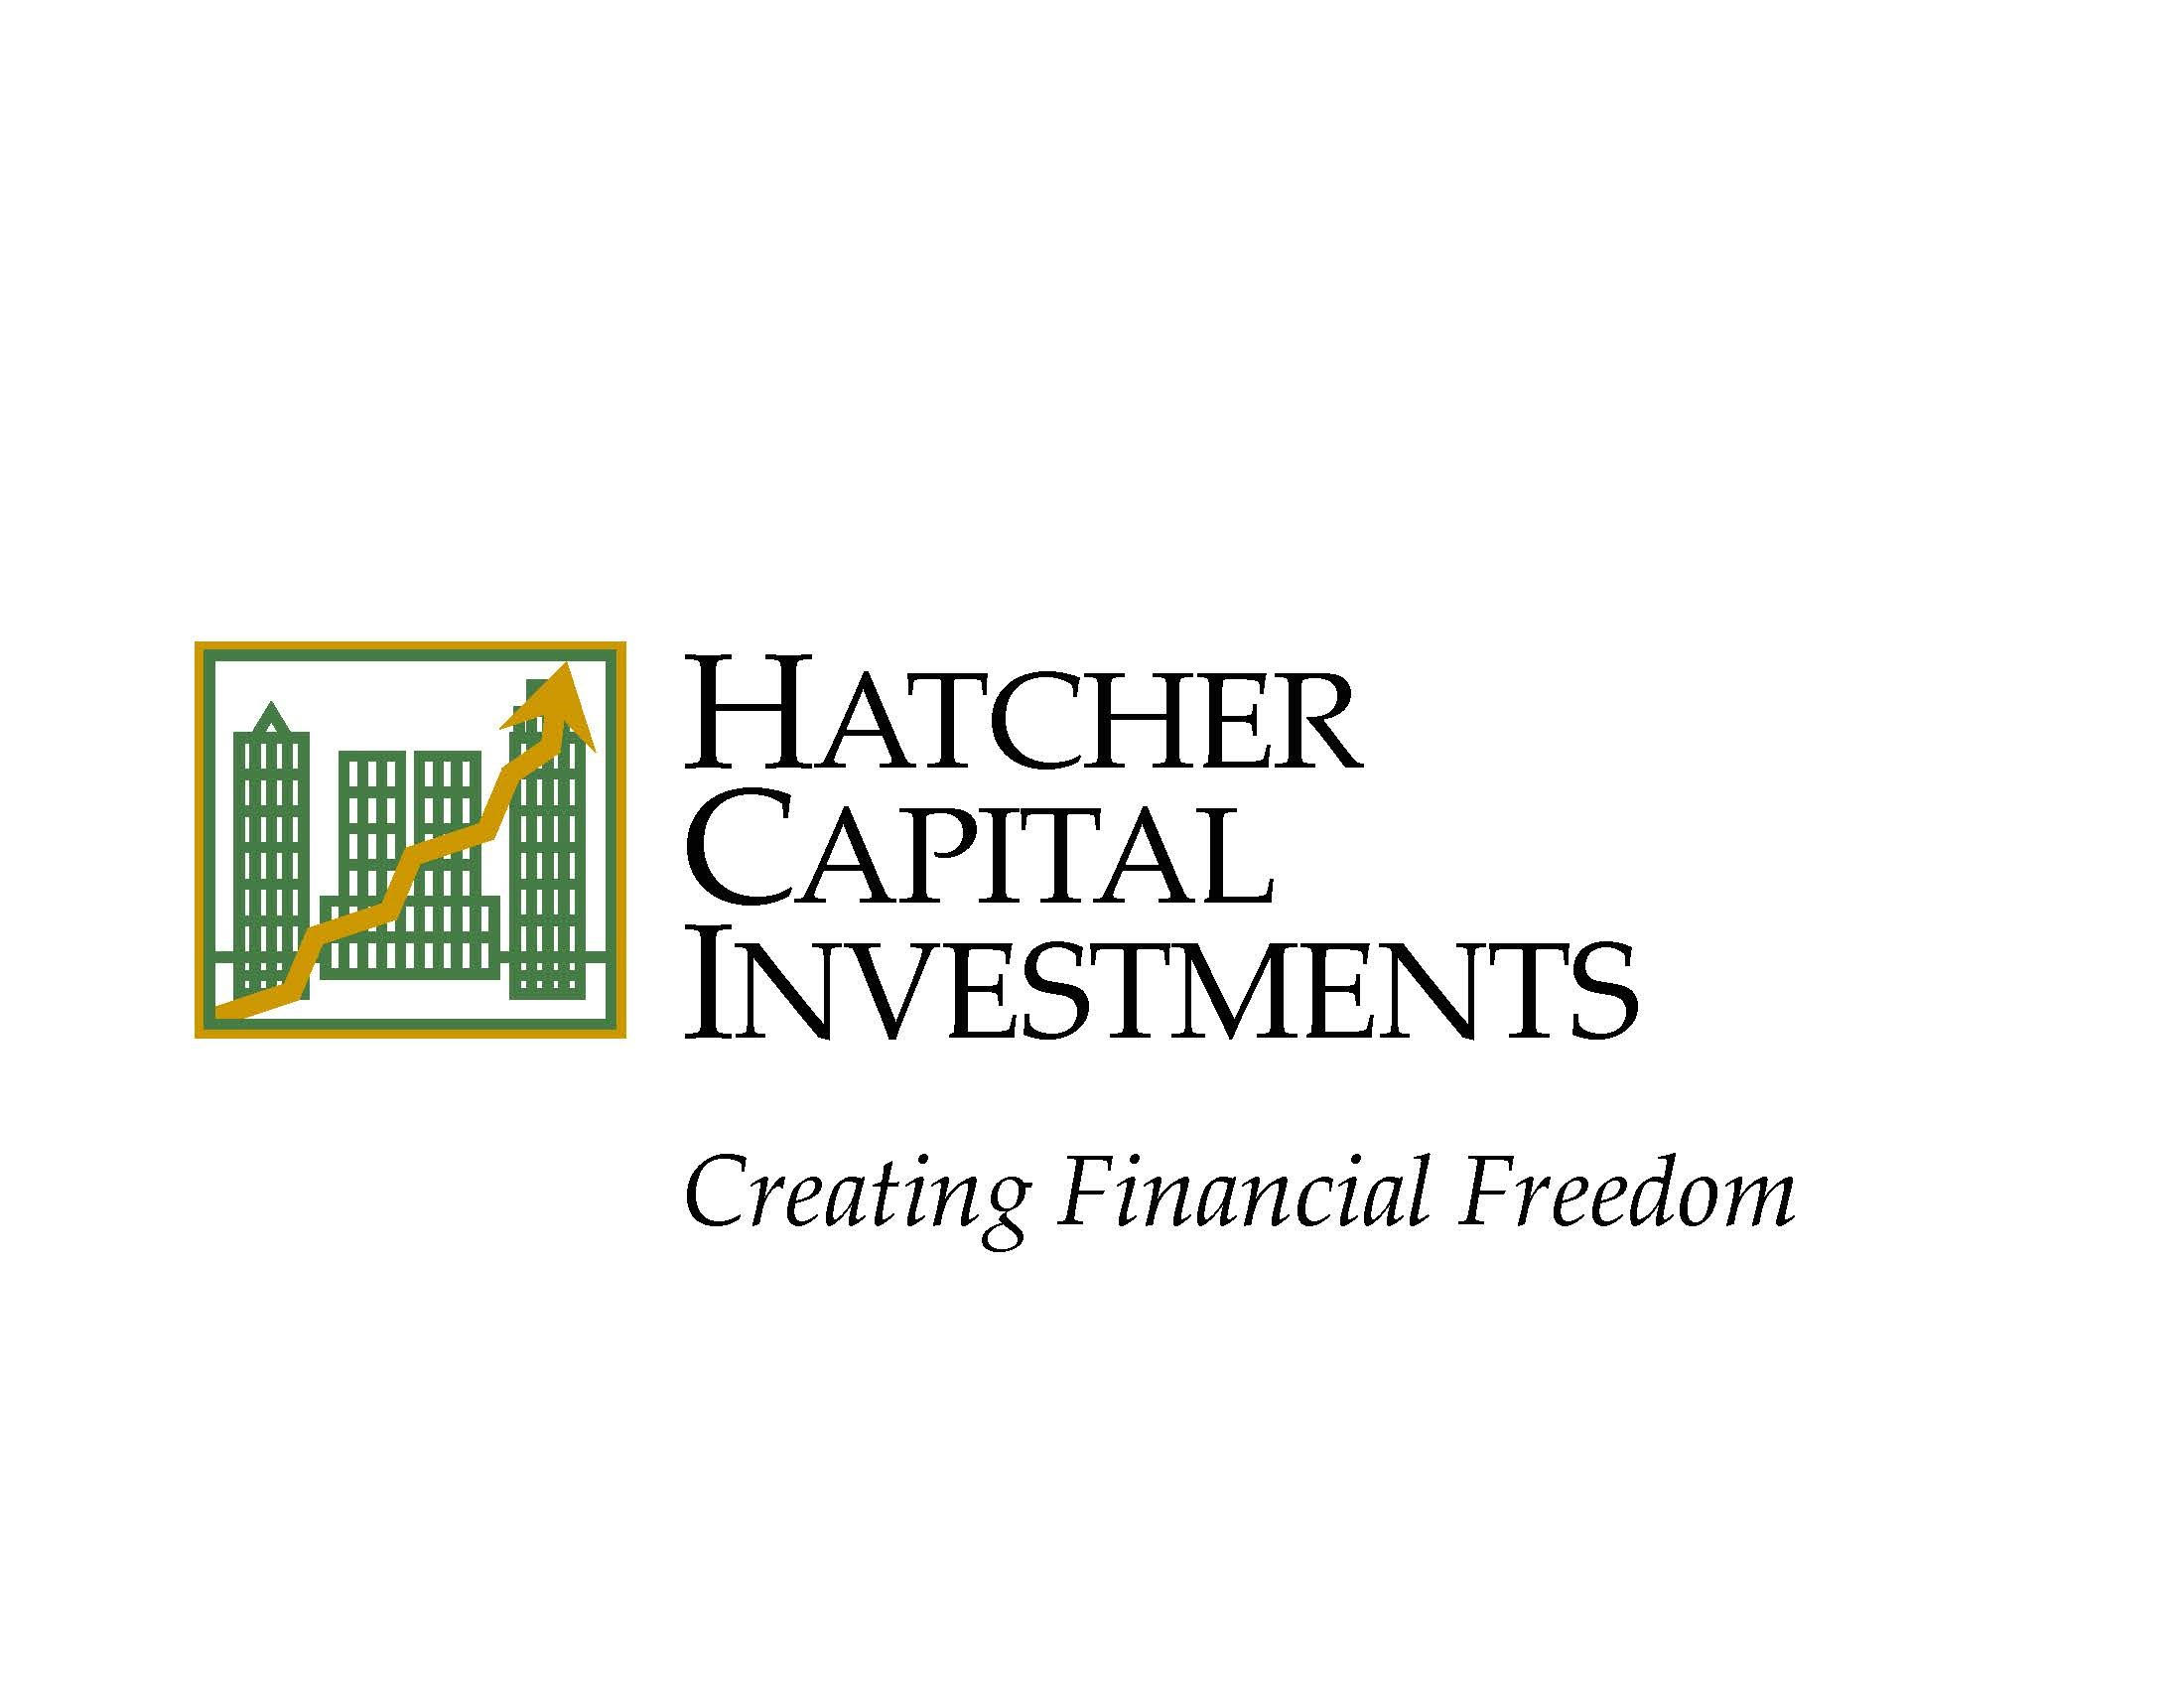 Thank you to Hatcher Capital Investments for sponsoring HR2022